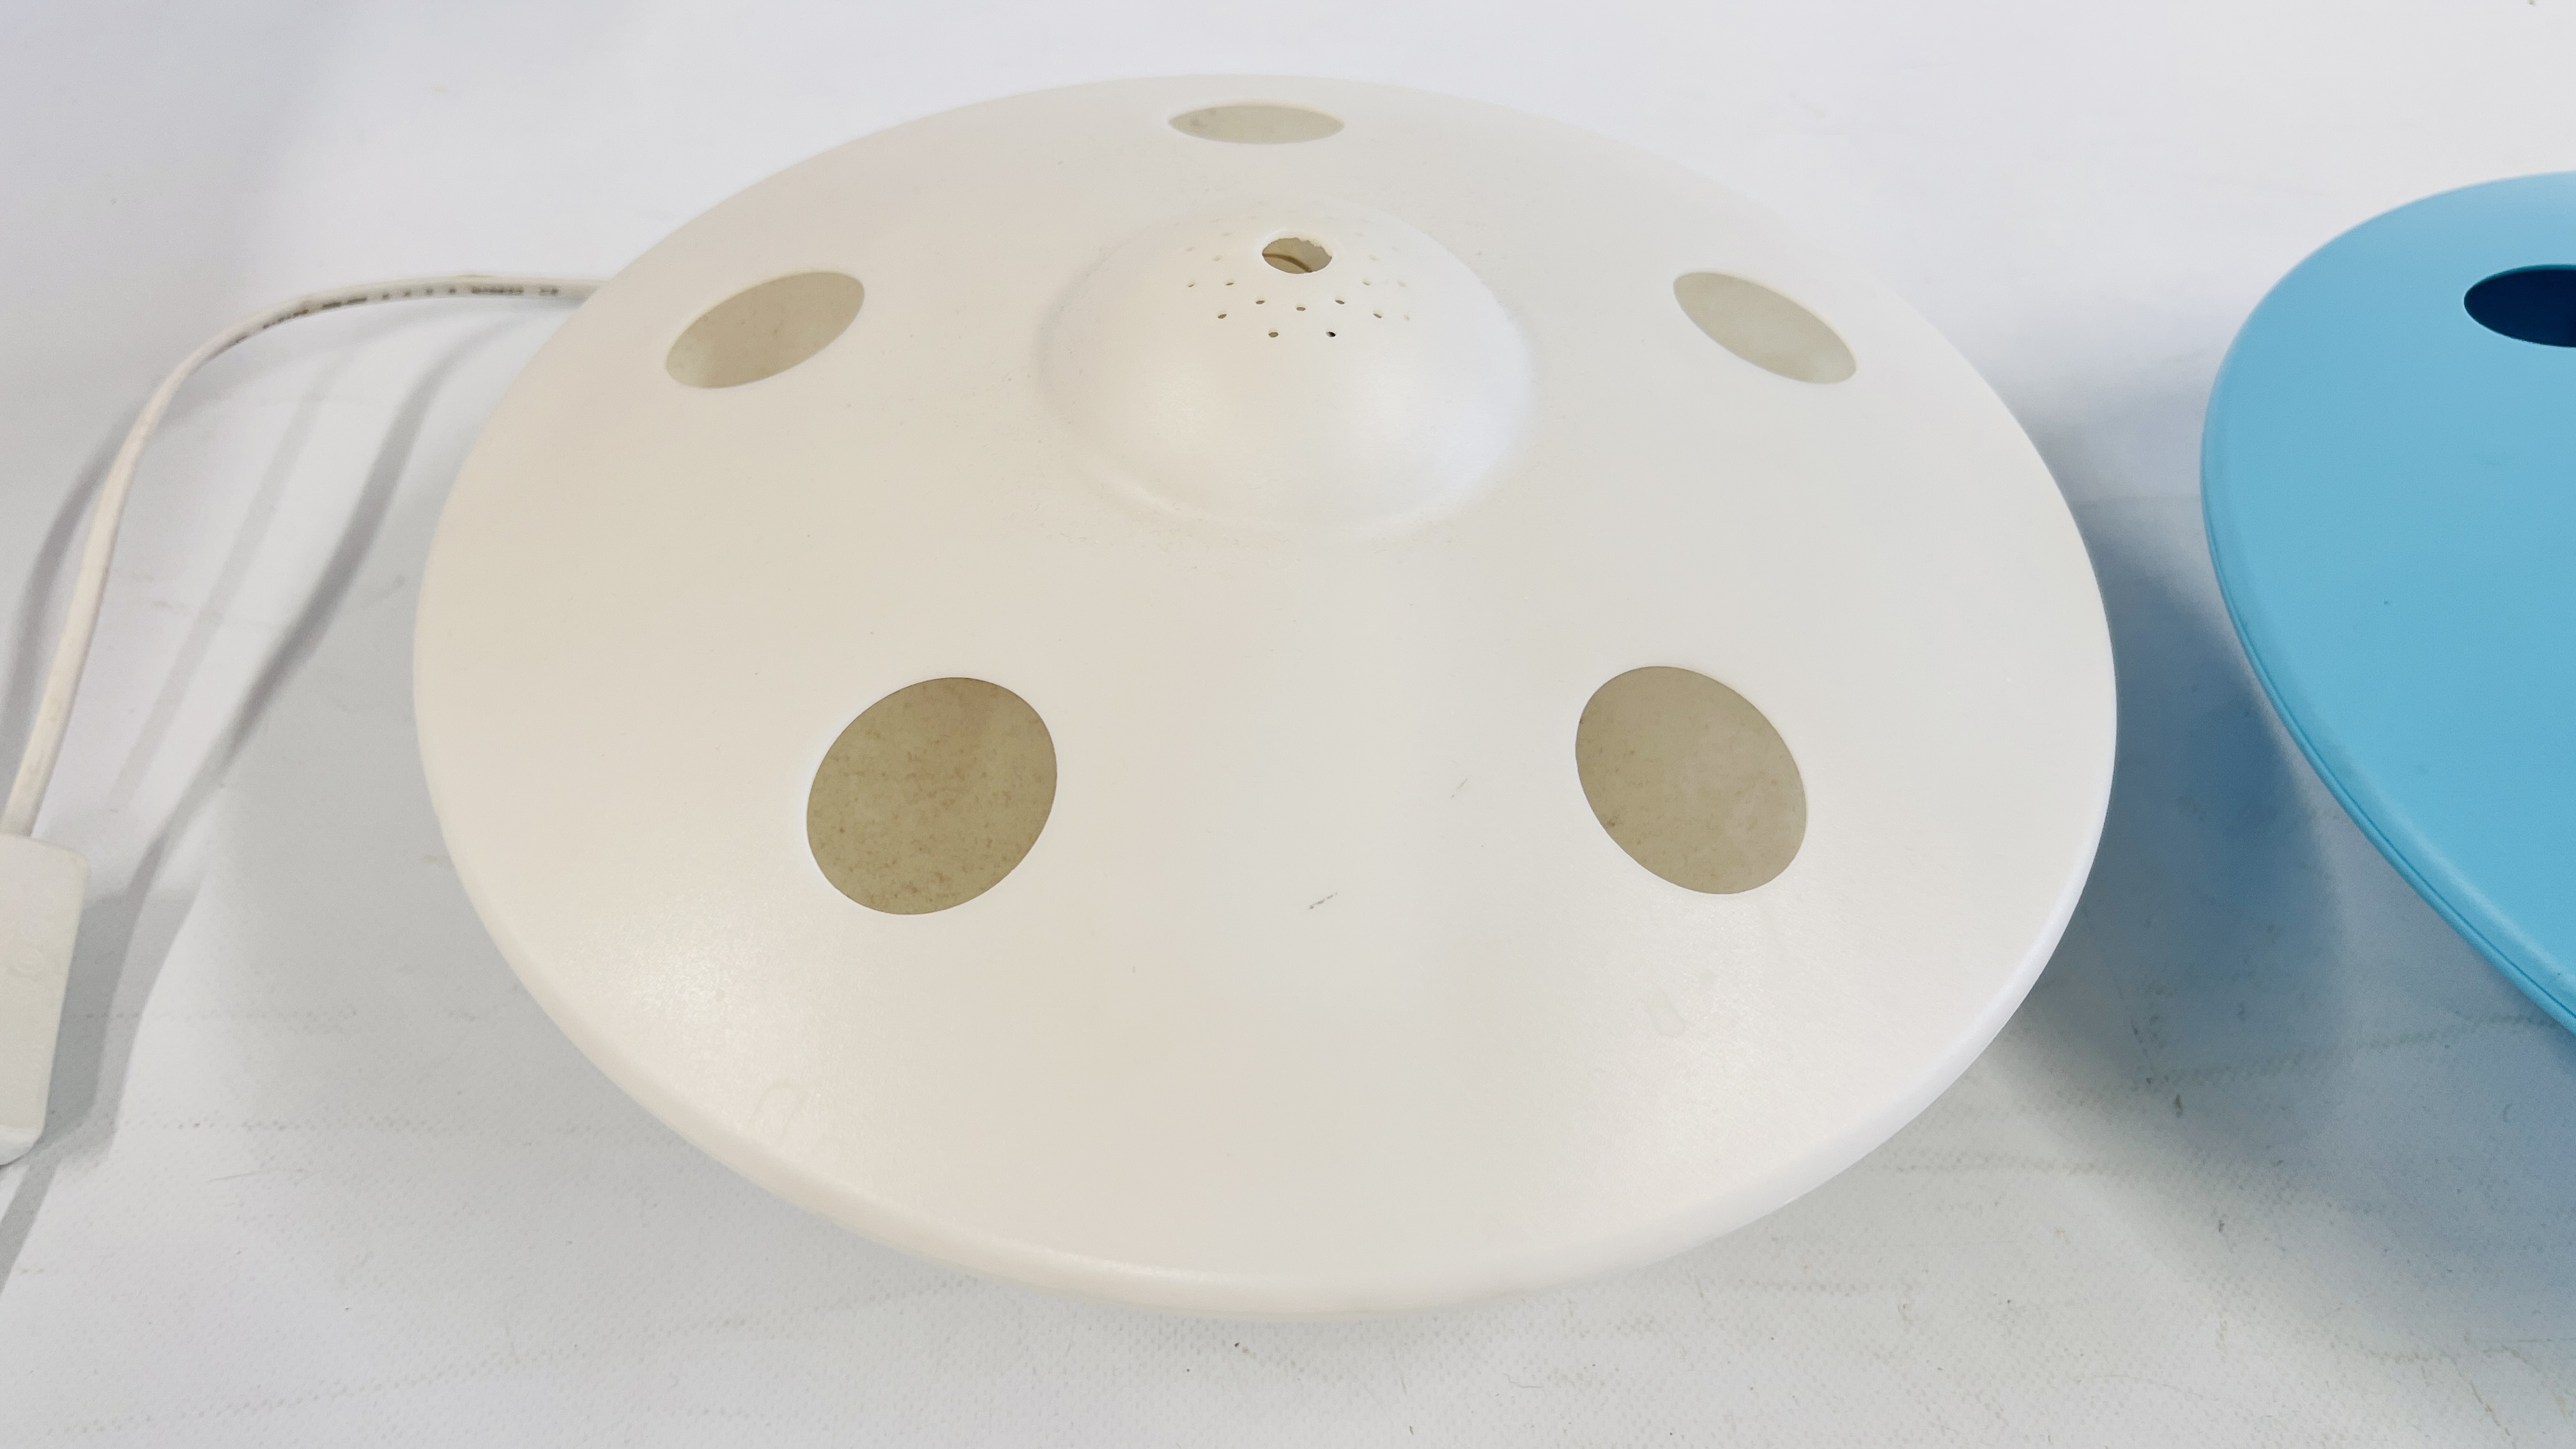 A PAIR OF DESIGNER FLYING SAUCER TABLE LAMPS, DESIGNED BY MR. - Image 4 of 4